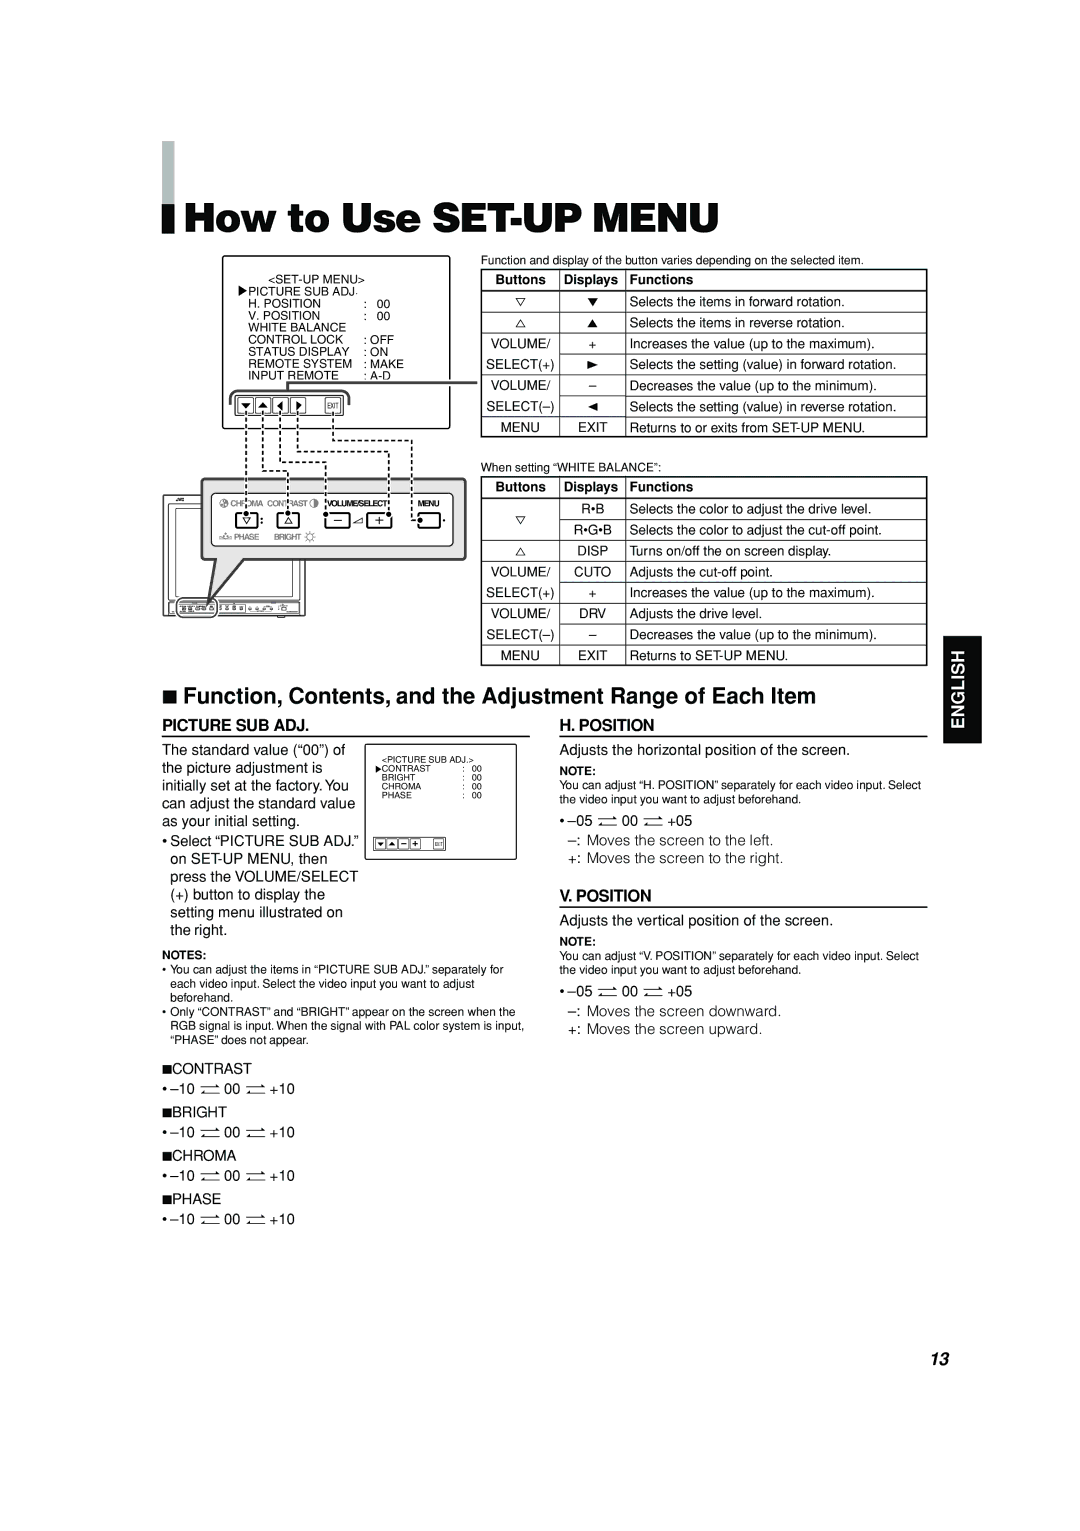 JVC TM-H150CG manual How to Use SET-UP Menu, Picture SUB ADJ, Position 